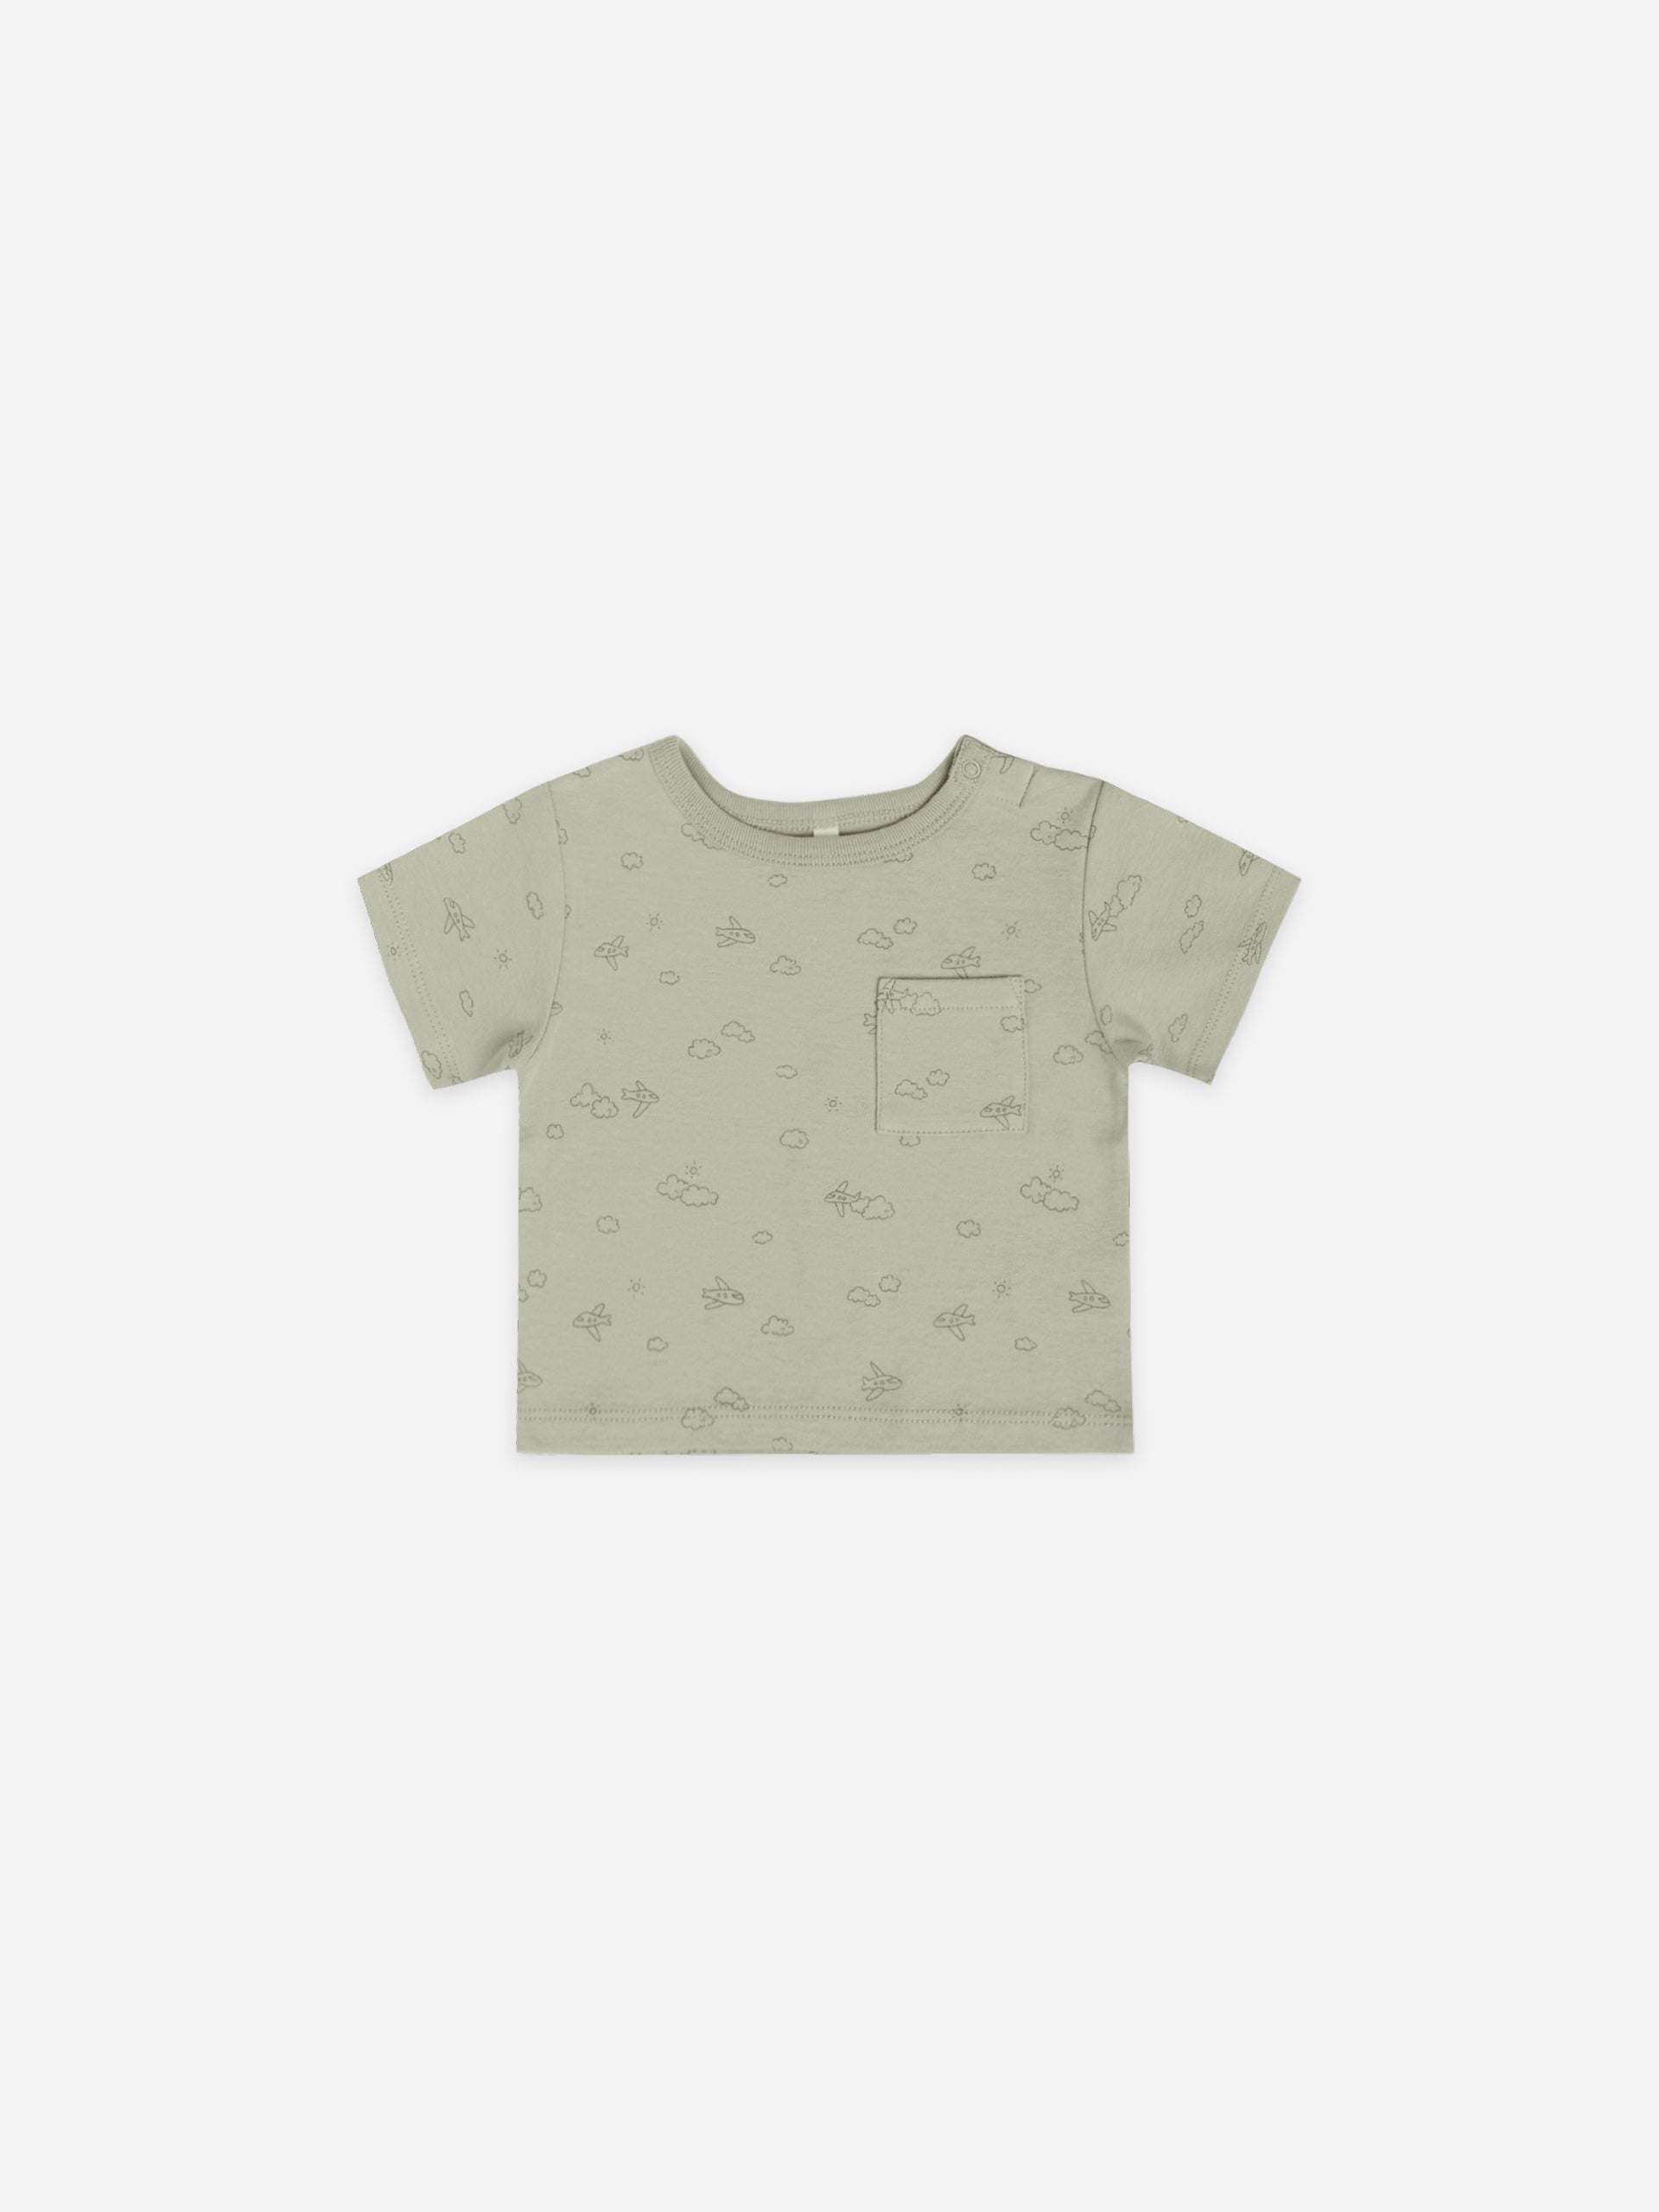 boxy pocket tee | airplanes - Quincy Mae | Baby Basics | Baby Clothing | Organic Baby Clothes | Modern Baby Boy Clothes |